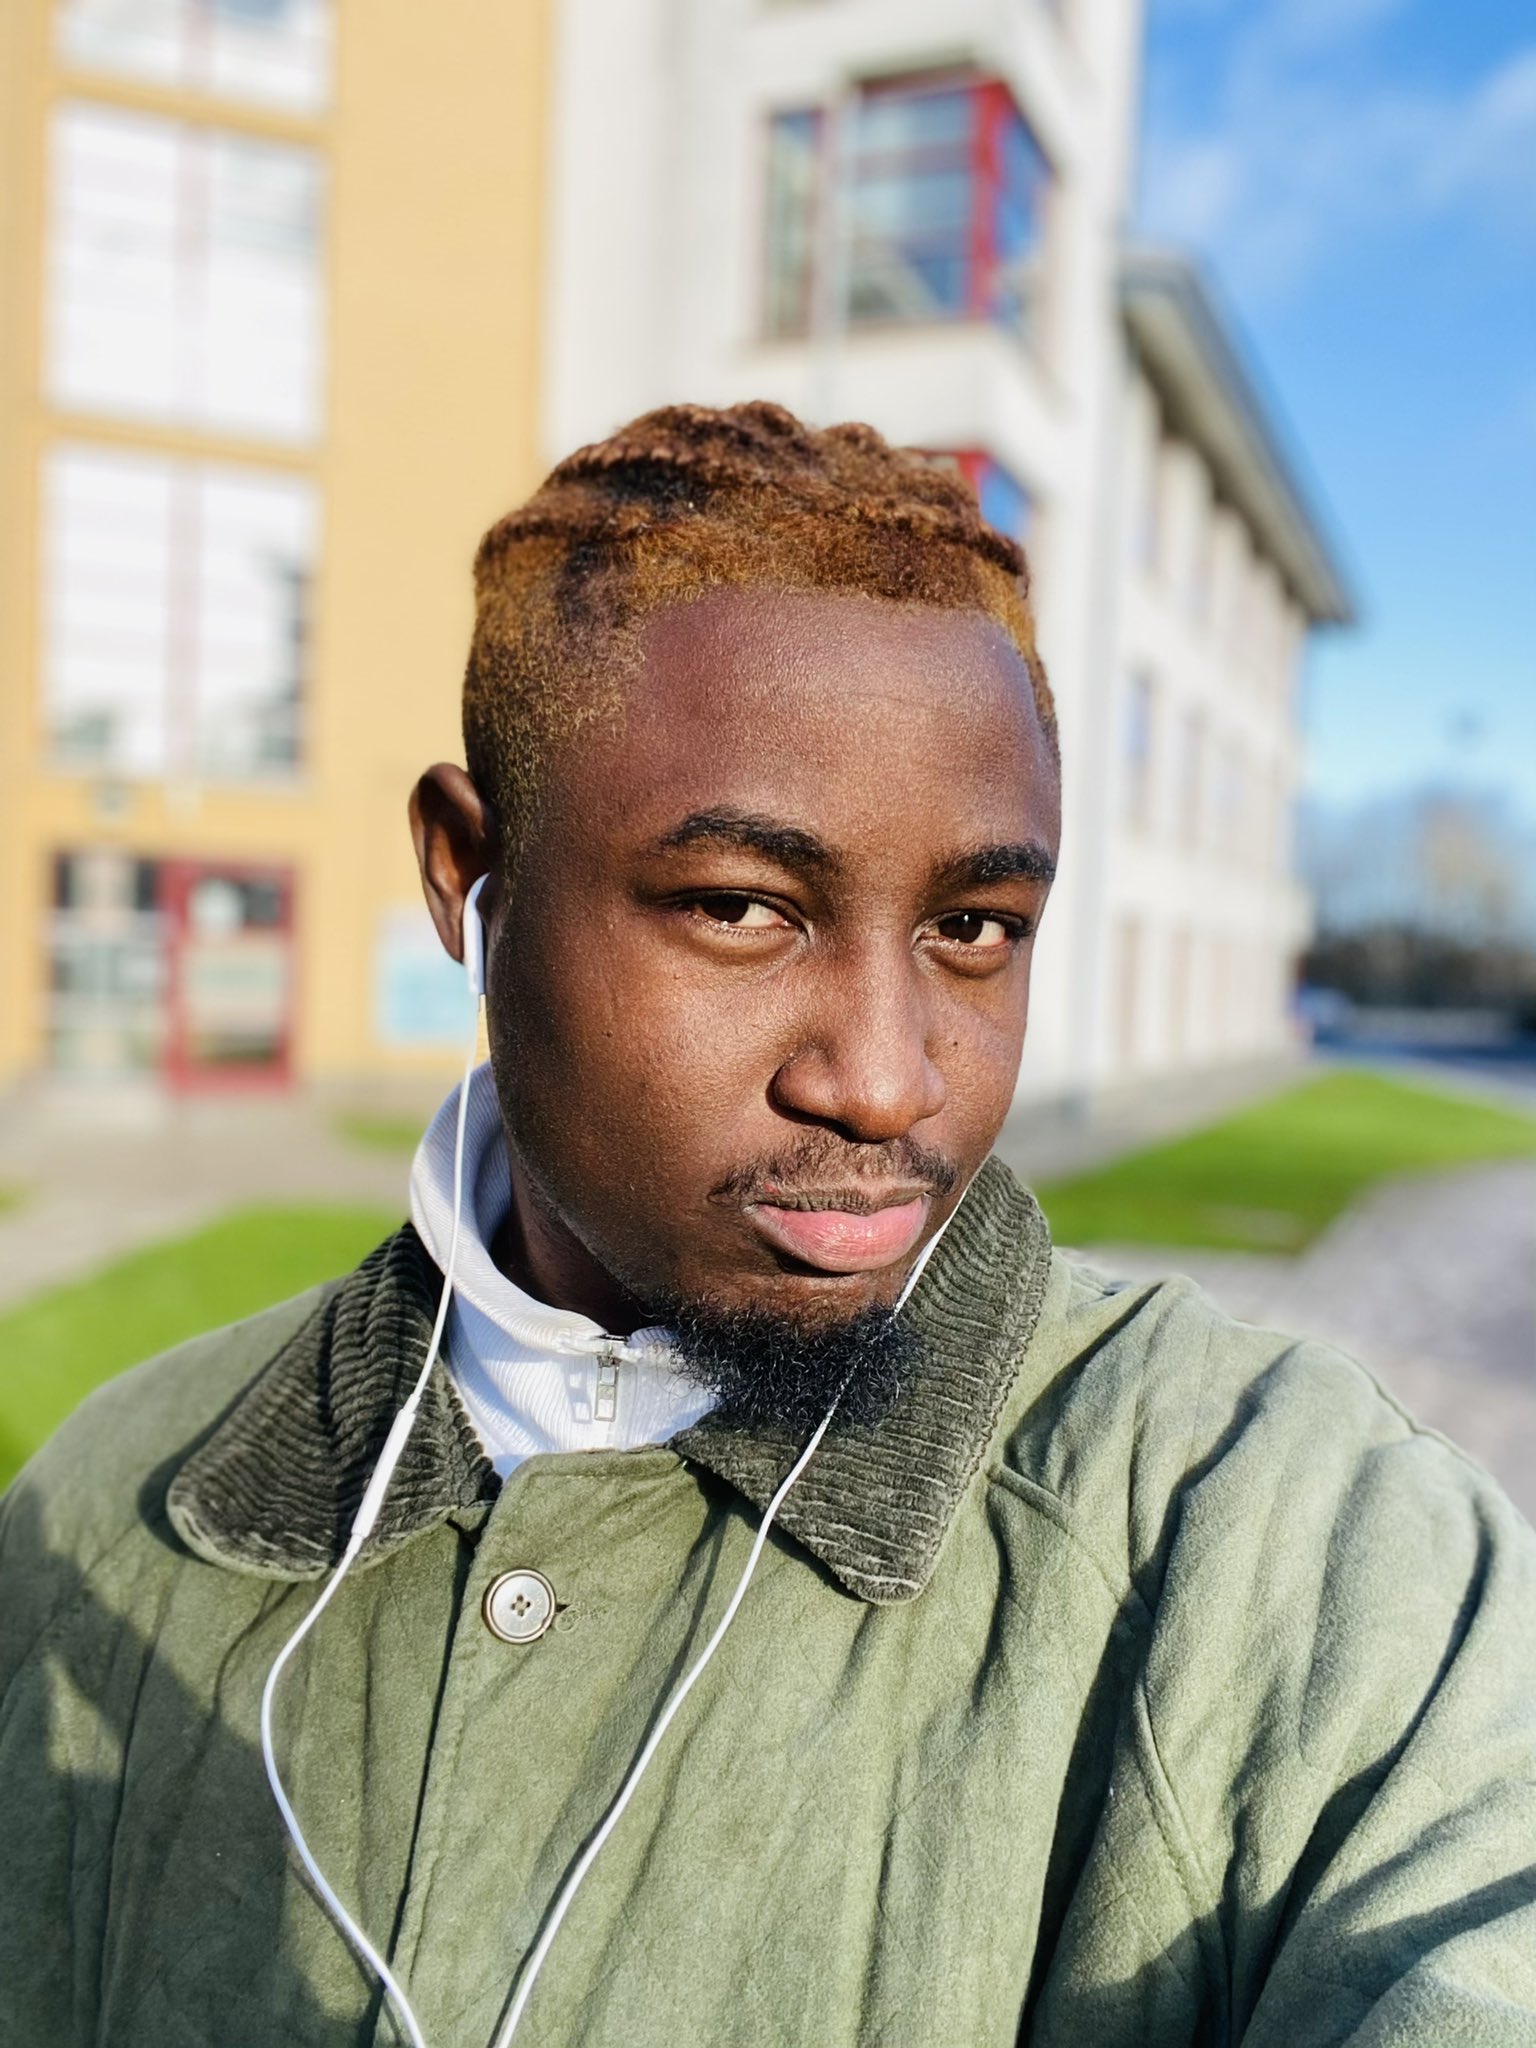 Nigerian Man Shares His Amazing Transformation After Relocating Abroad Photos